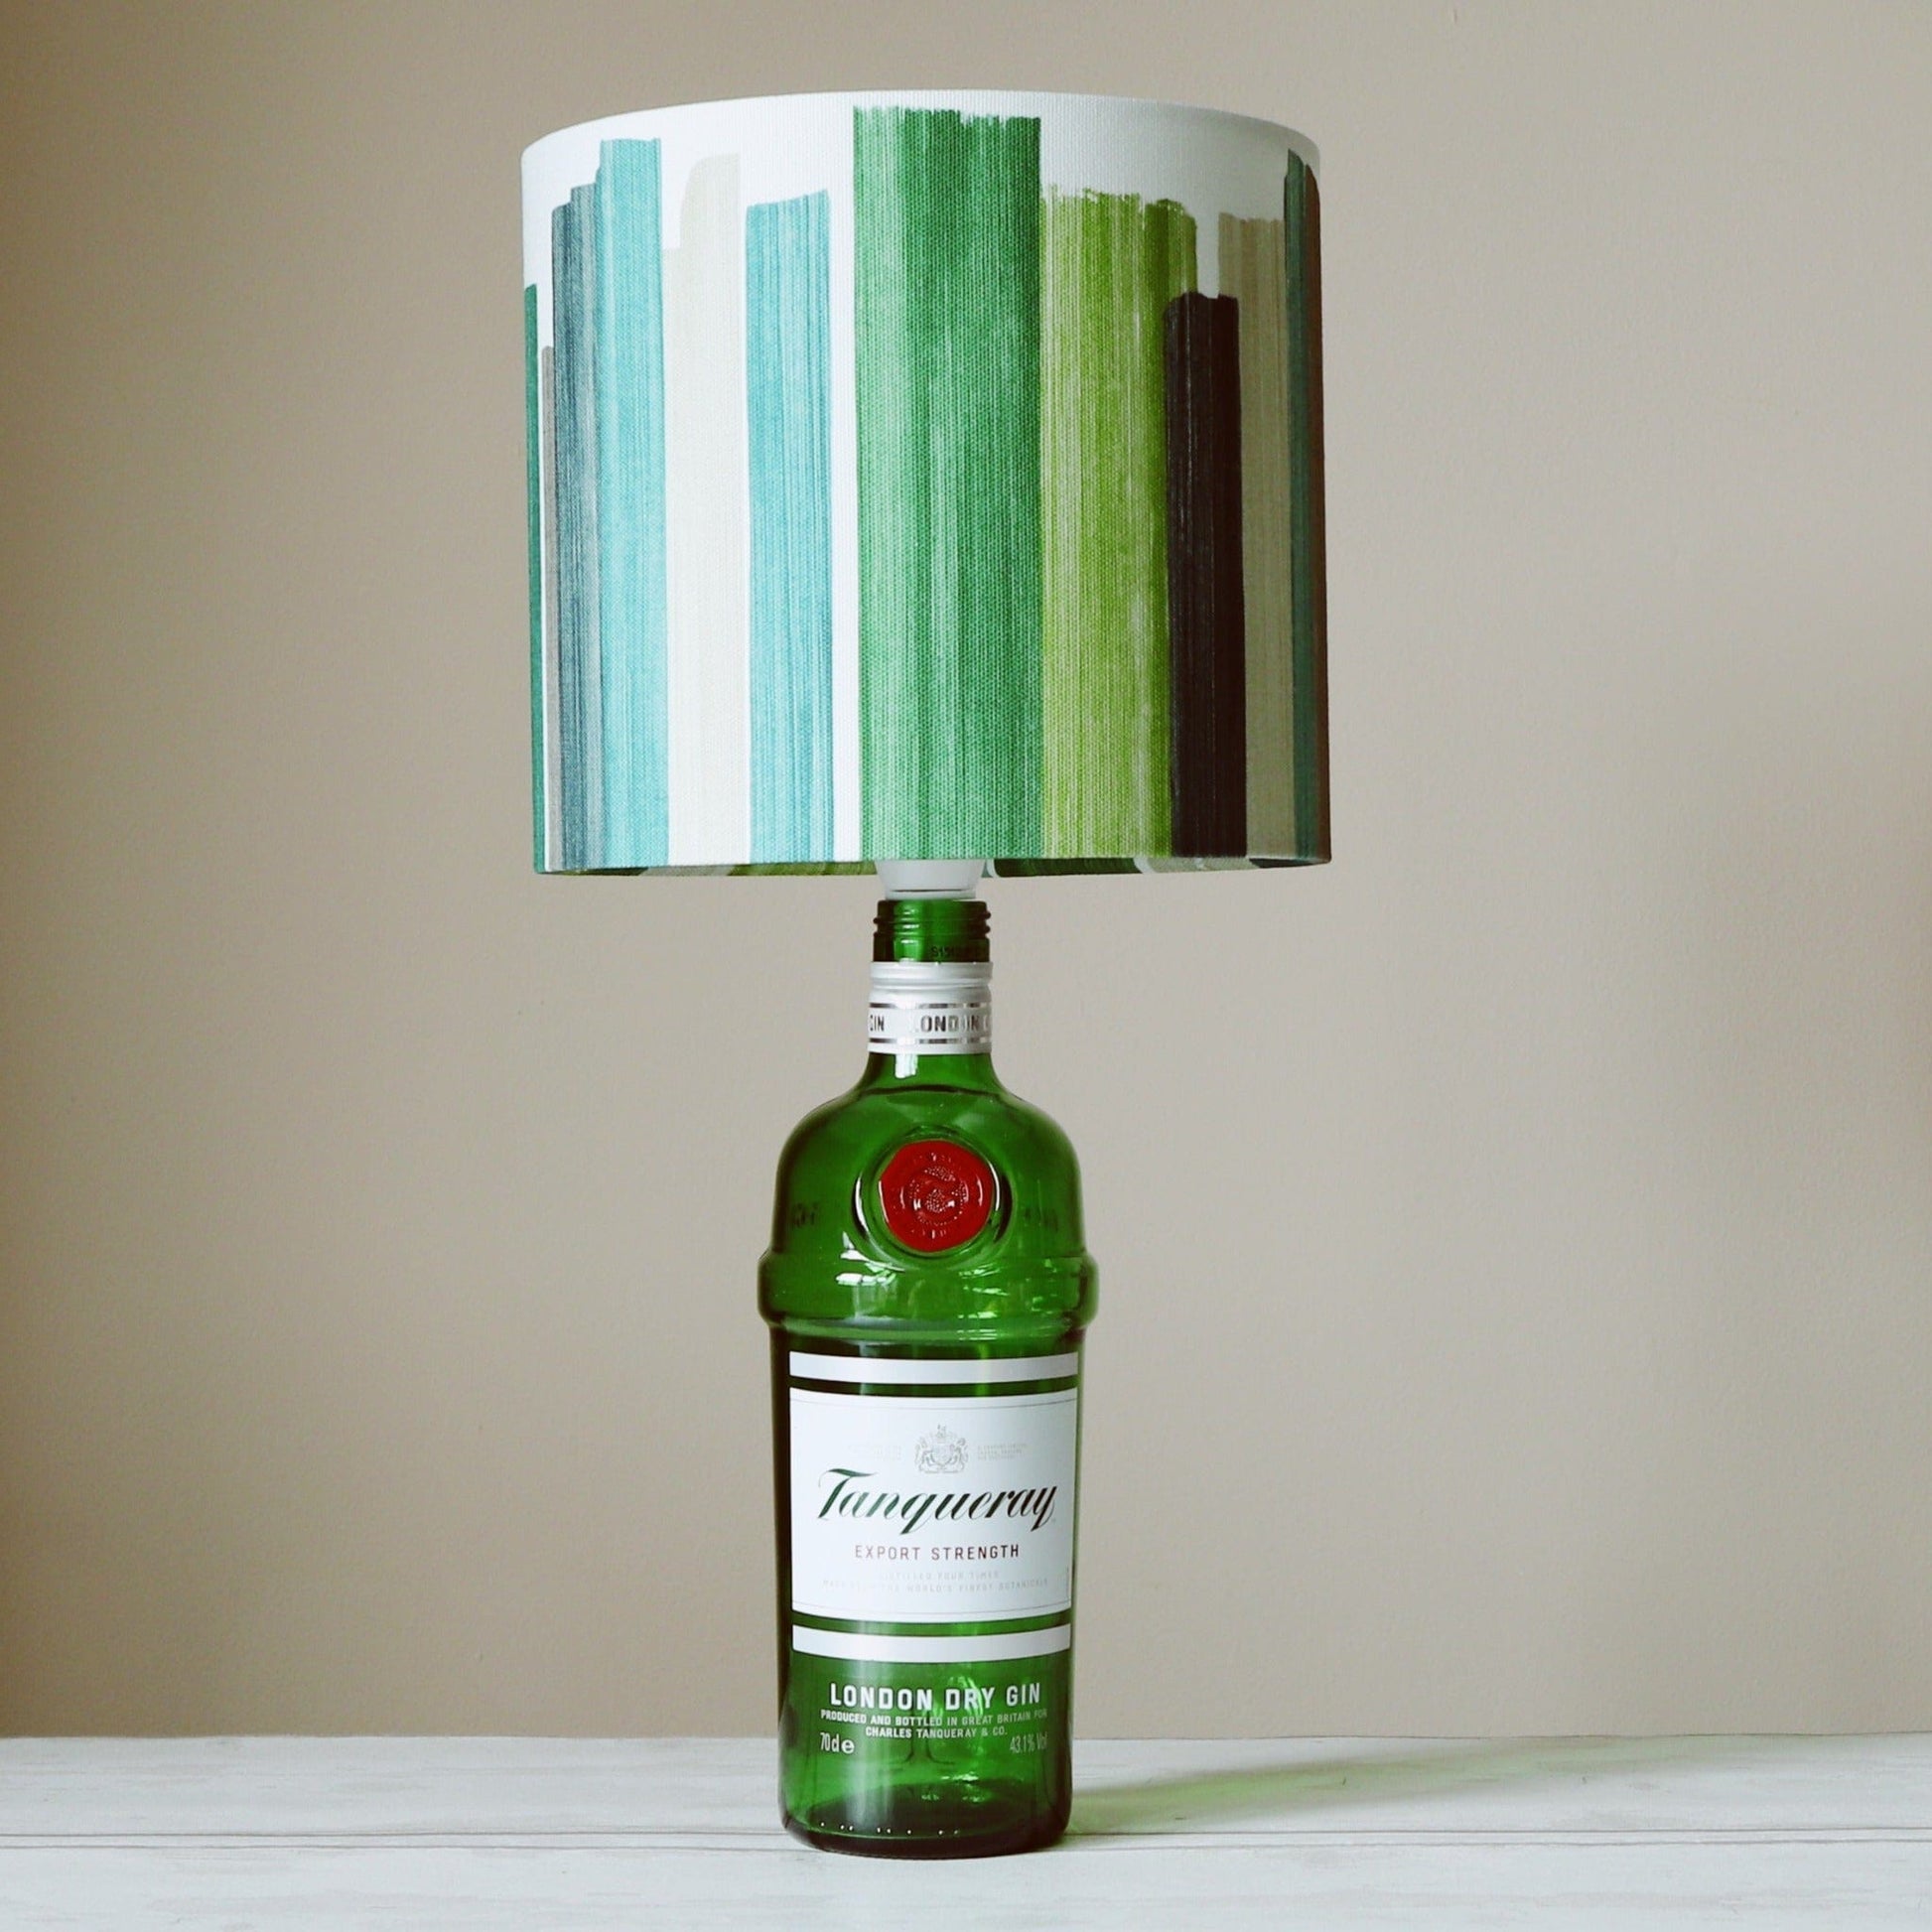 Ruby Jones Home Lampshades Tanqueray London Dry Gin Lamp 16312